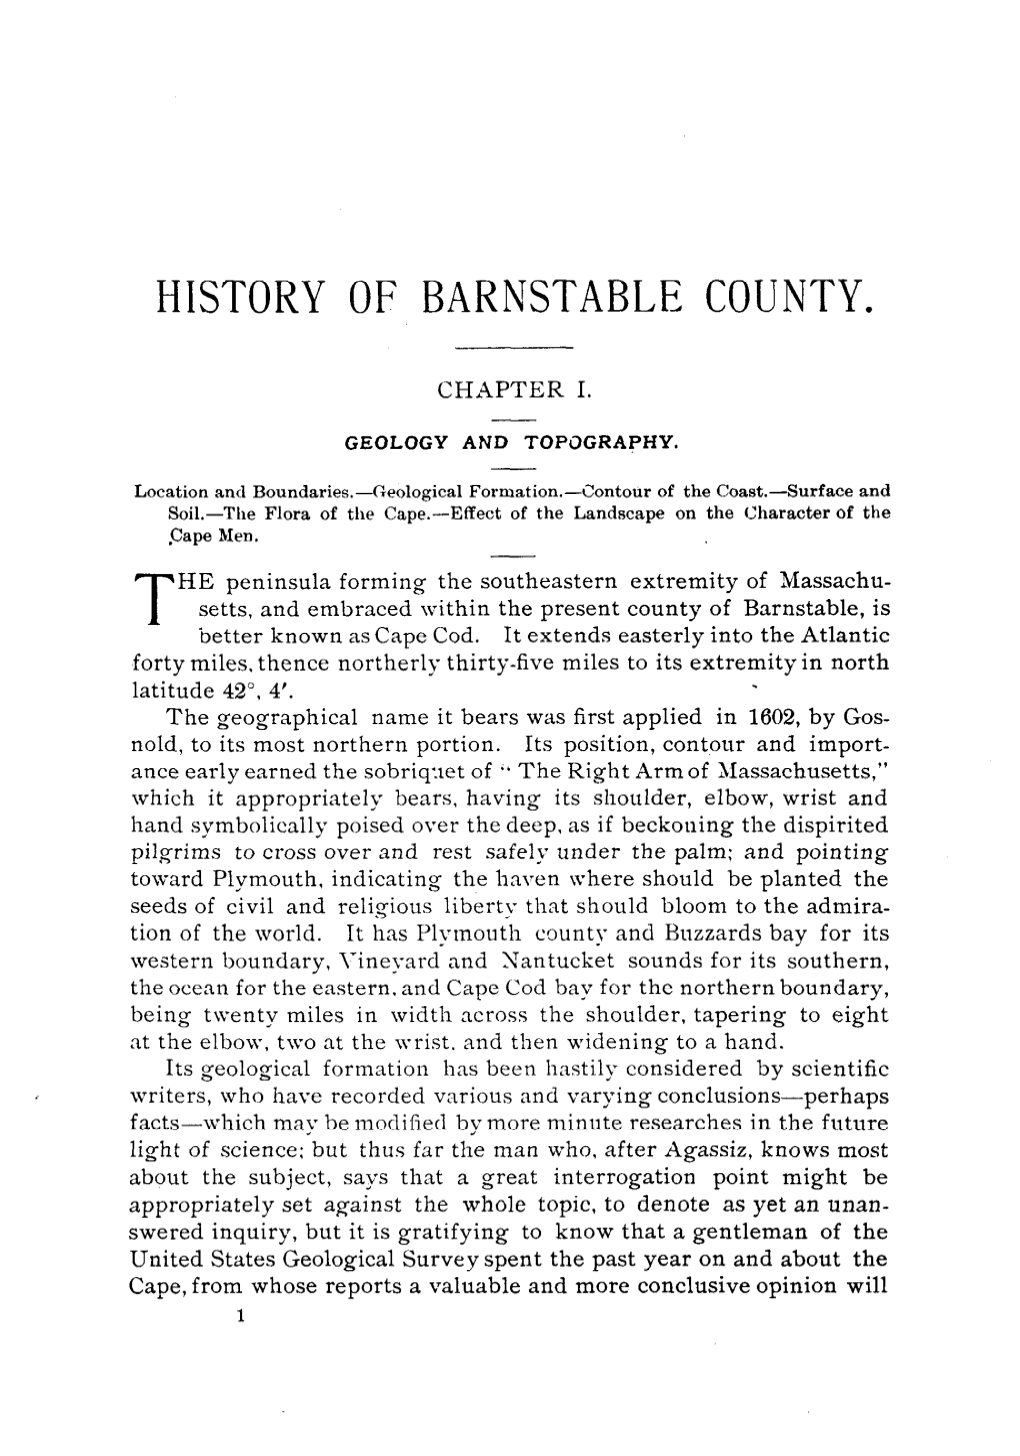 The History of Barnstable County